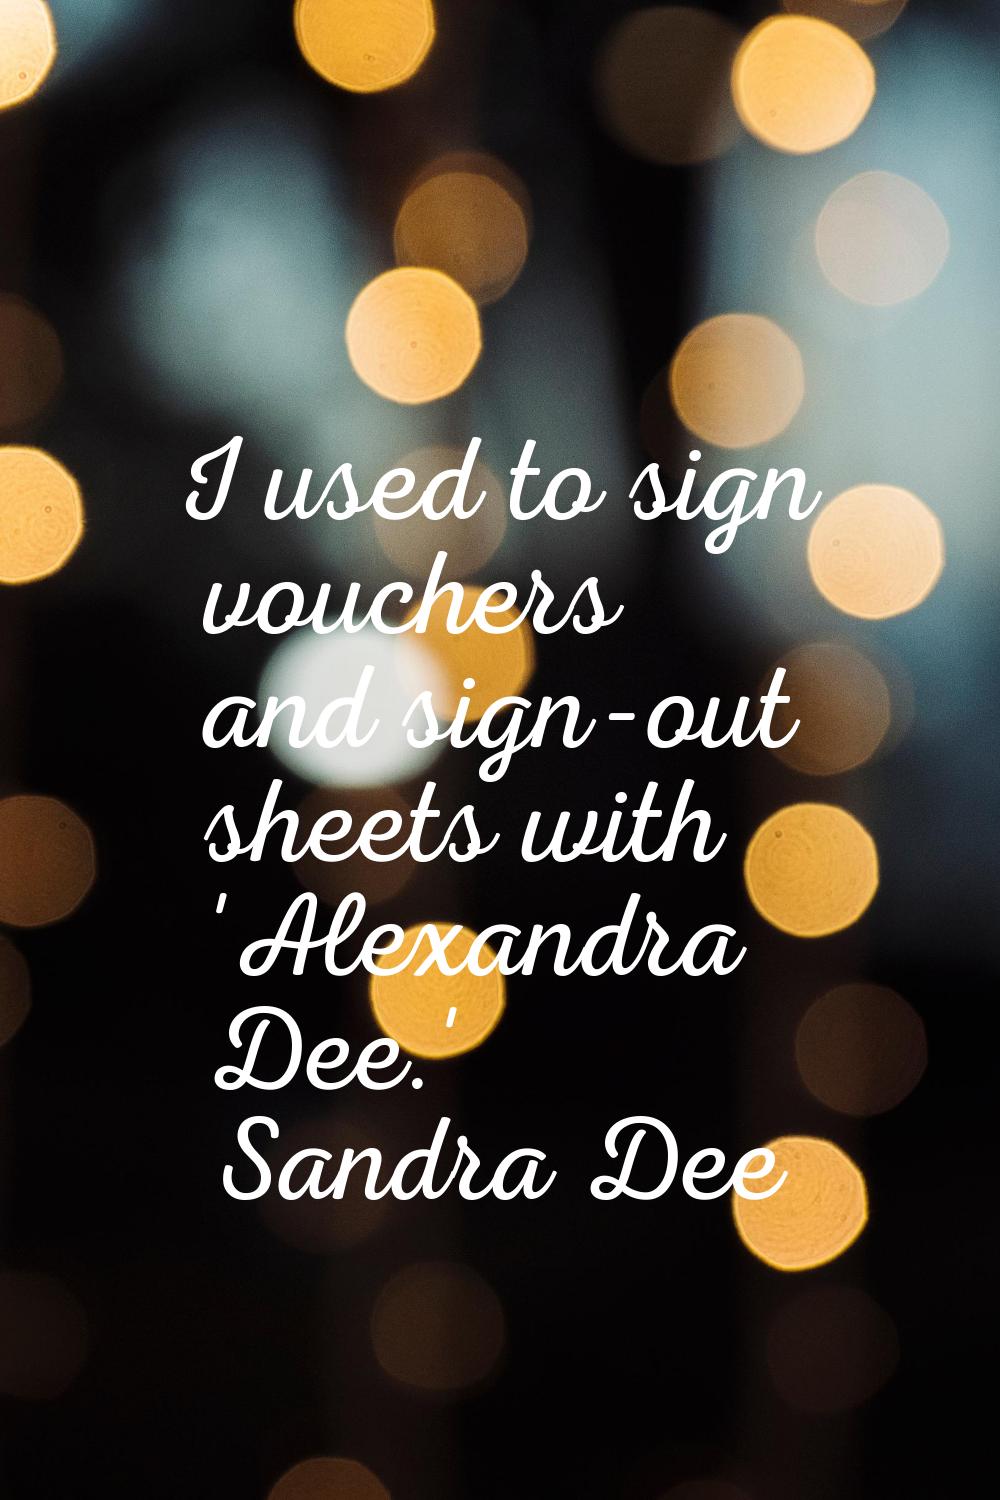 I used to sign vouchers and sign-out sheets with 'Alexandra Dee.'